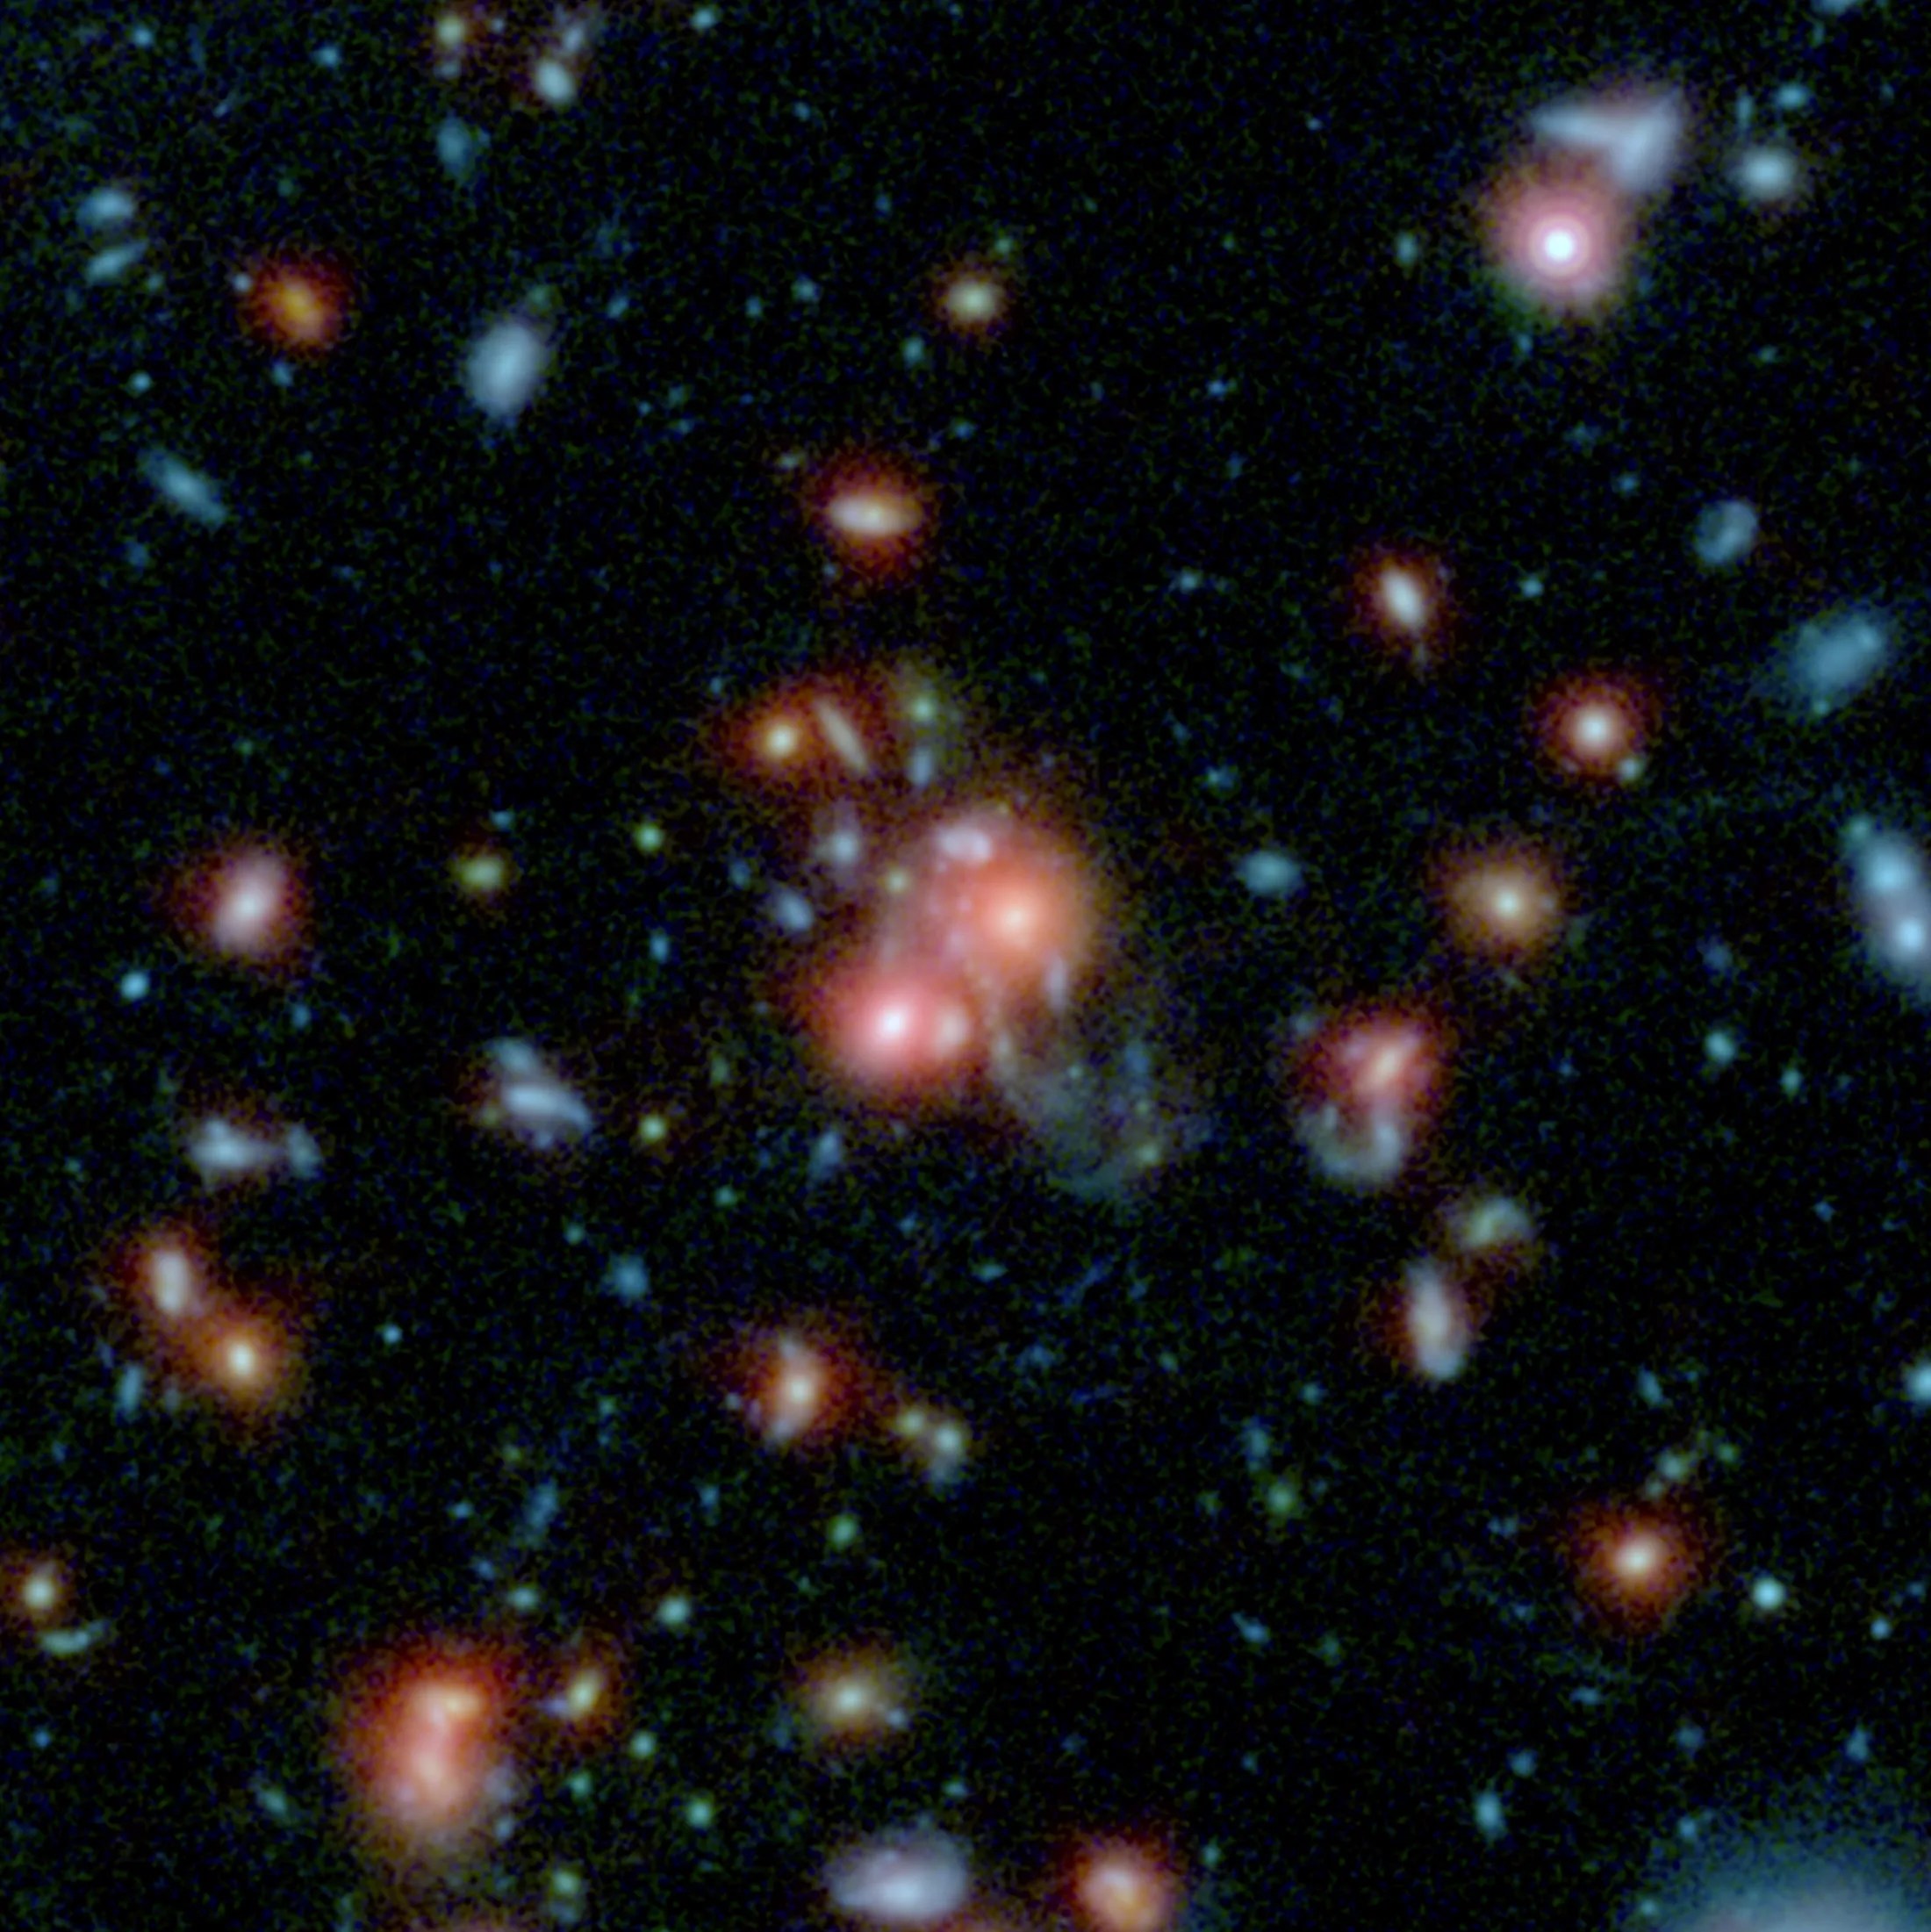 Blue, red and yellow galaxies.